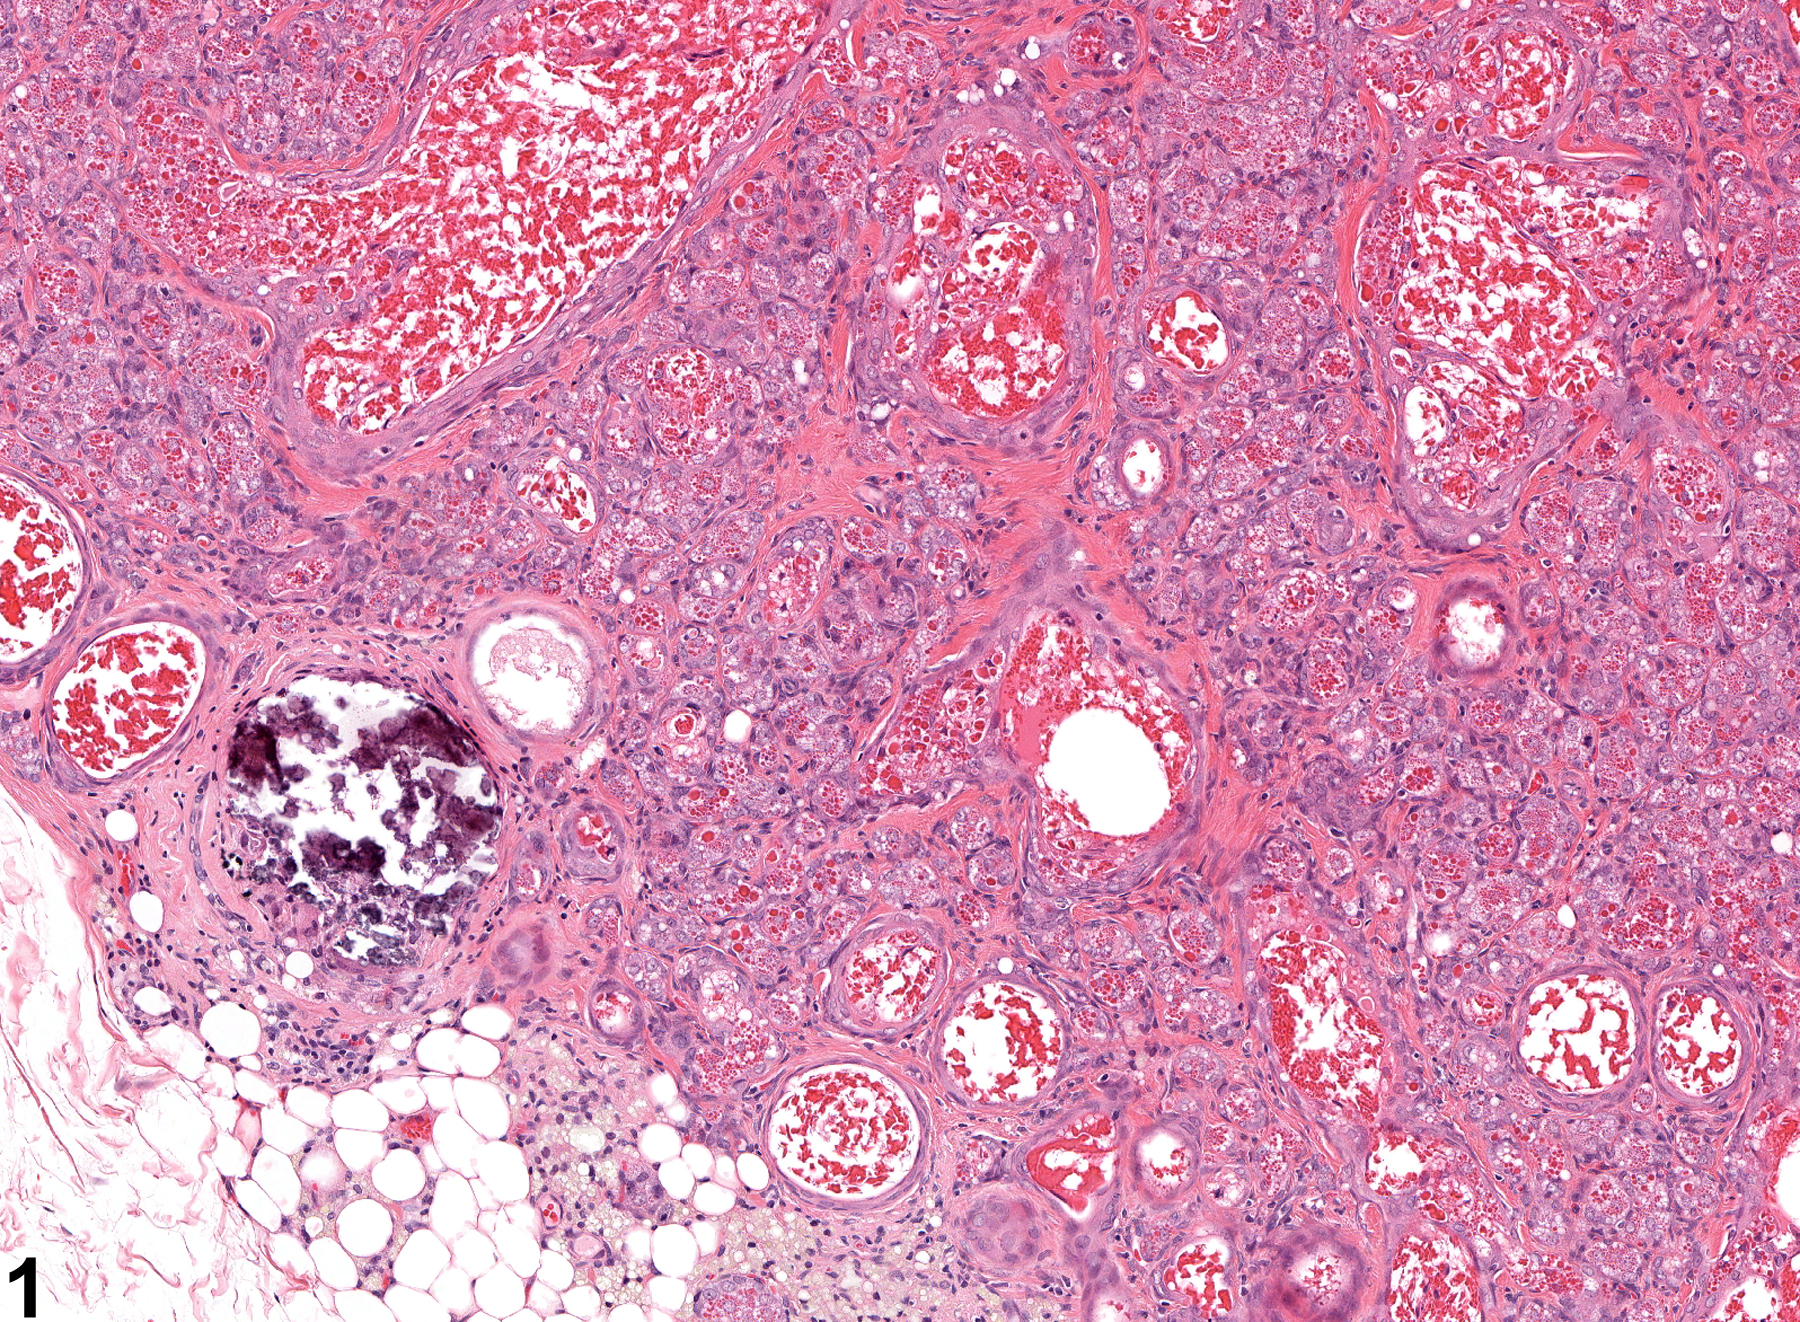 Image of mineral in the clitoral gland from a female F344/N rat in a chronic study